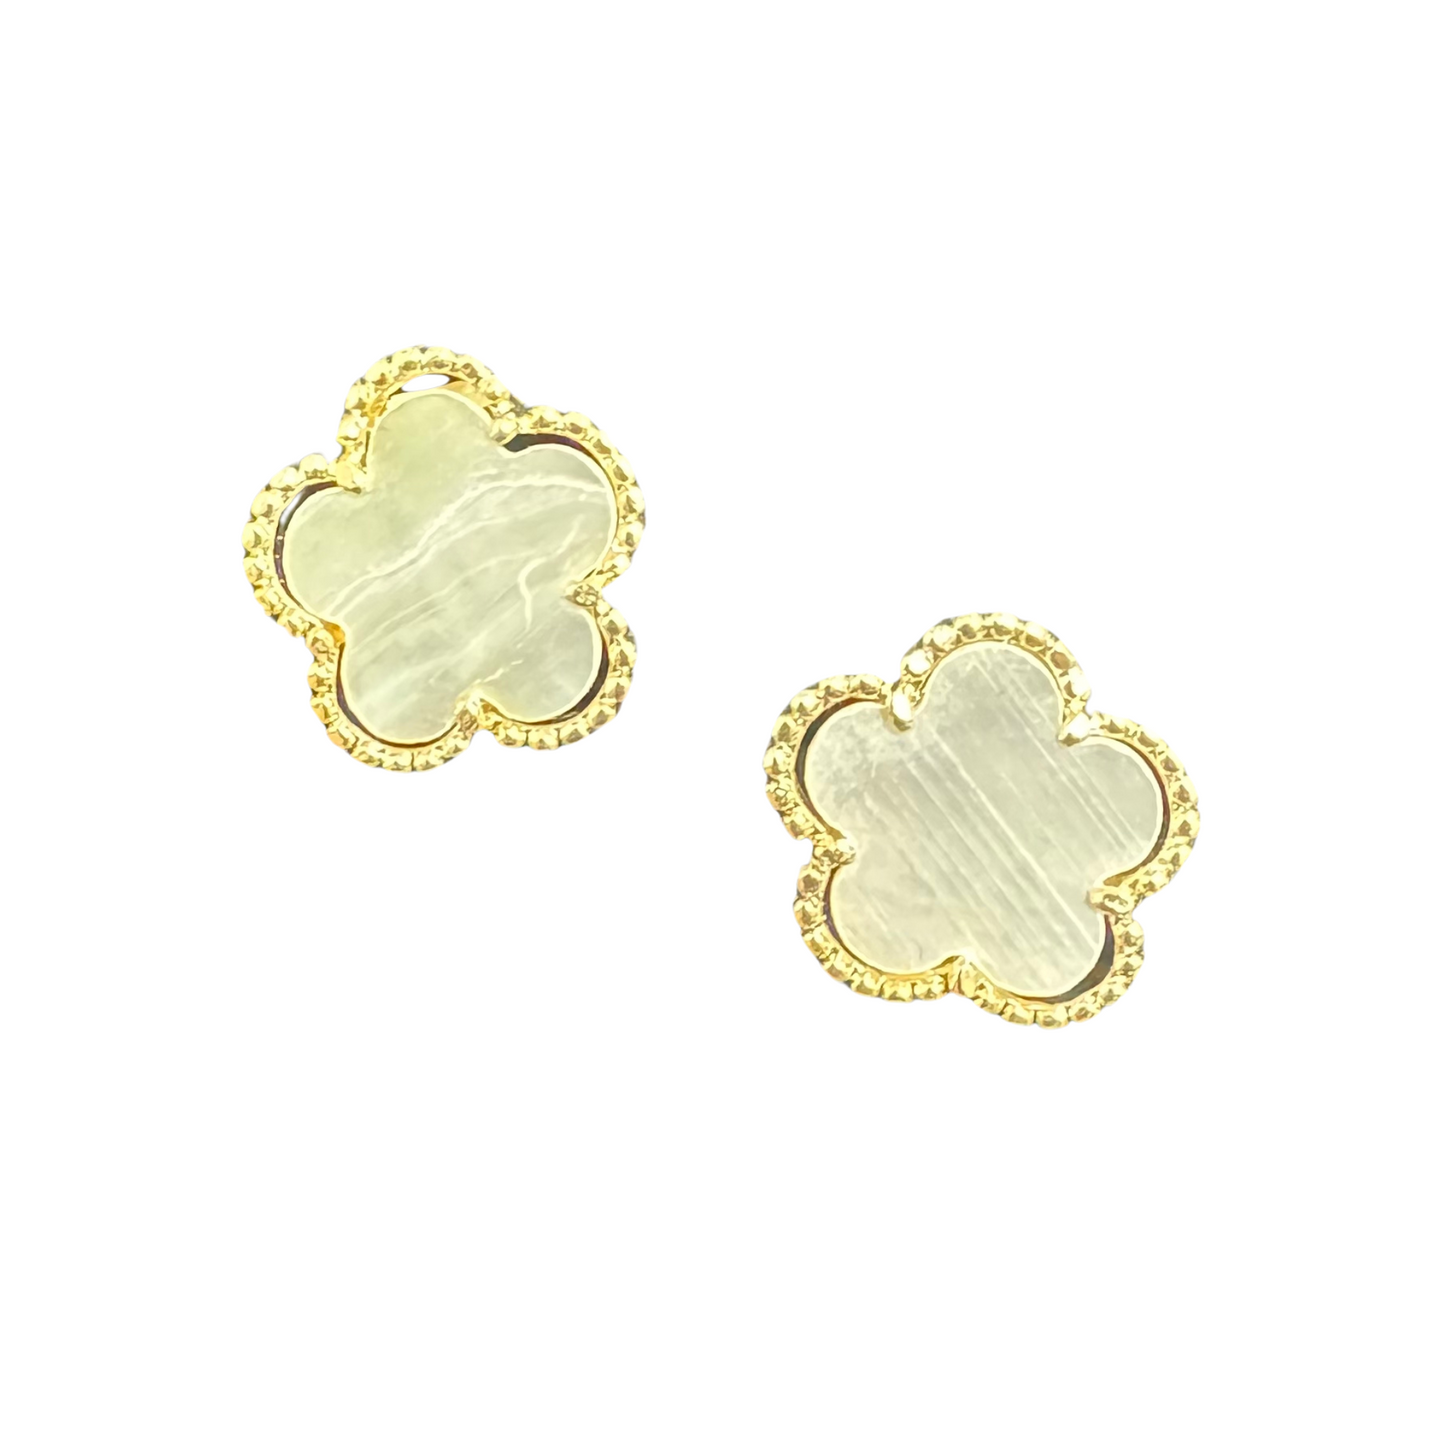 Clover studs with gold accents in mother of pearl